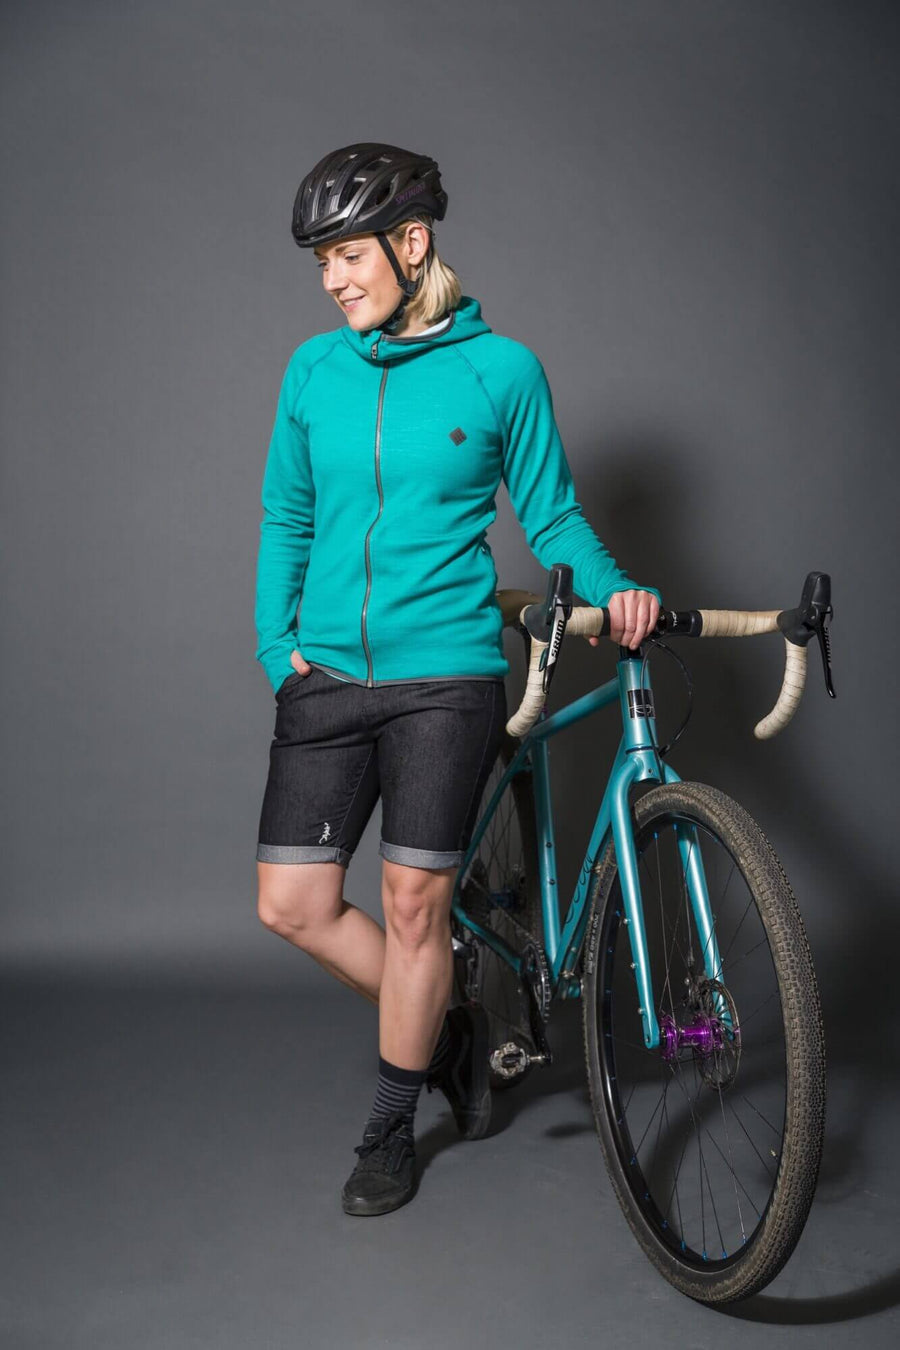 Women‘s - BUUZ Nul Hoodie 1st Edt. Aftersports Anthracite Beet Red Geschenke Gravel Herbst / Winter Hoodies L Lapis M Merino Mountainbike S spo-default spo-disabled spo-notify-me-disabled SUB - Loose - Trail Cut tops Urban & E-Bike Winter-Guide315 Women XS